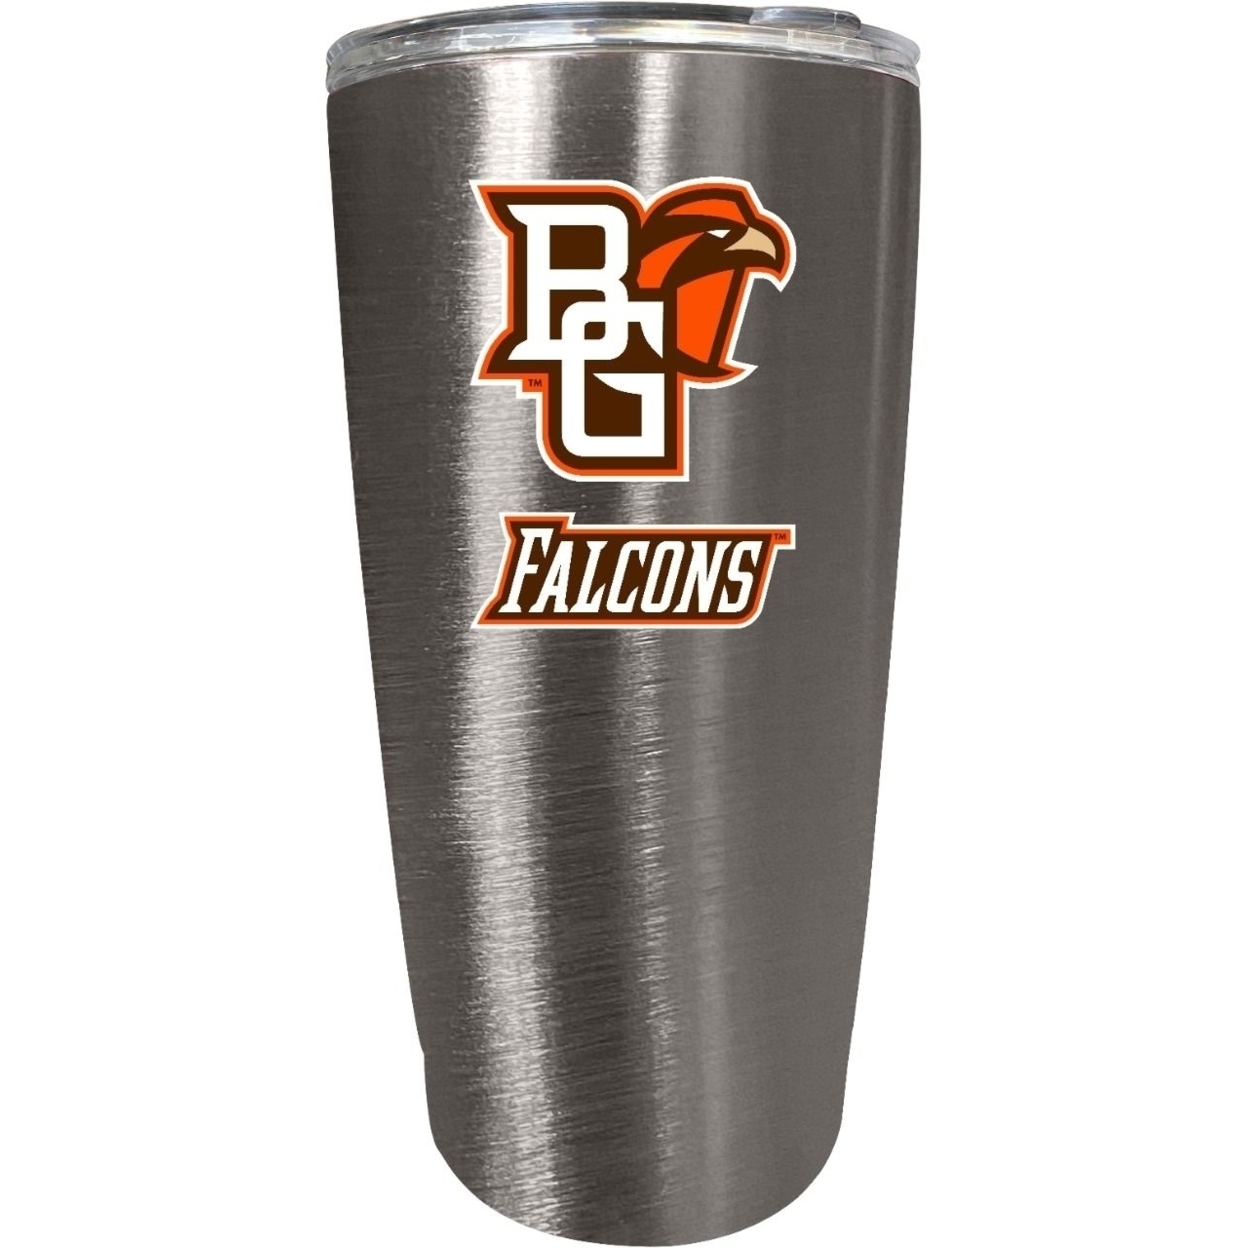 Bowling Green Falcons 16 Oz Insulated Stainless Steel Tumbler Colorless